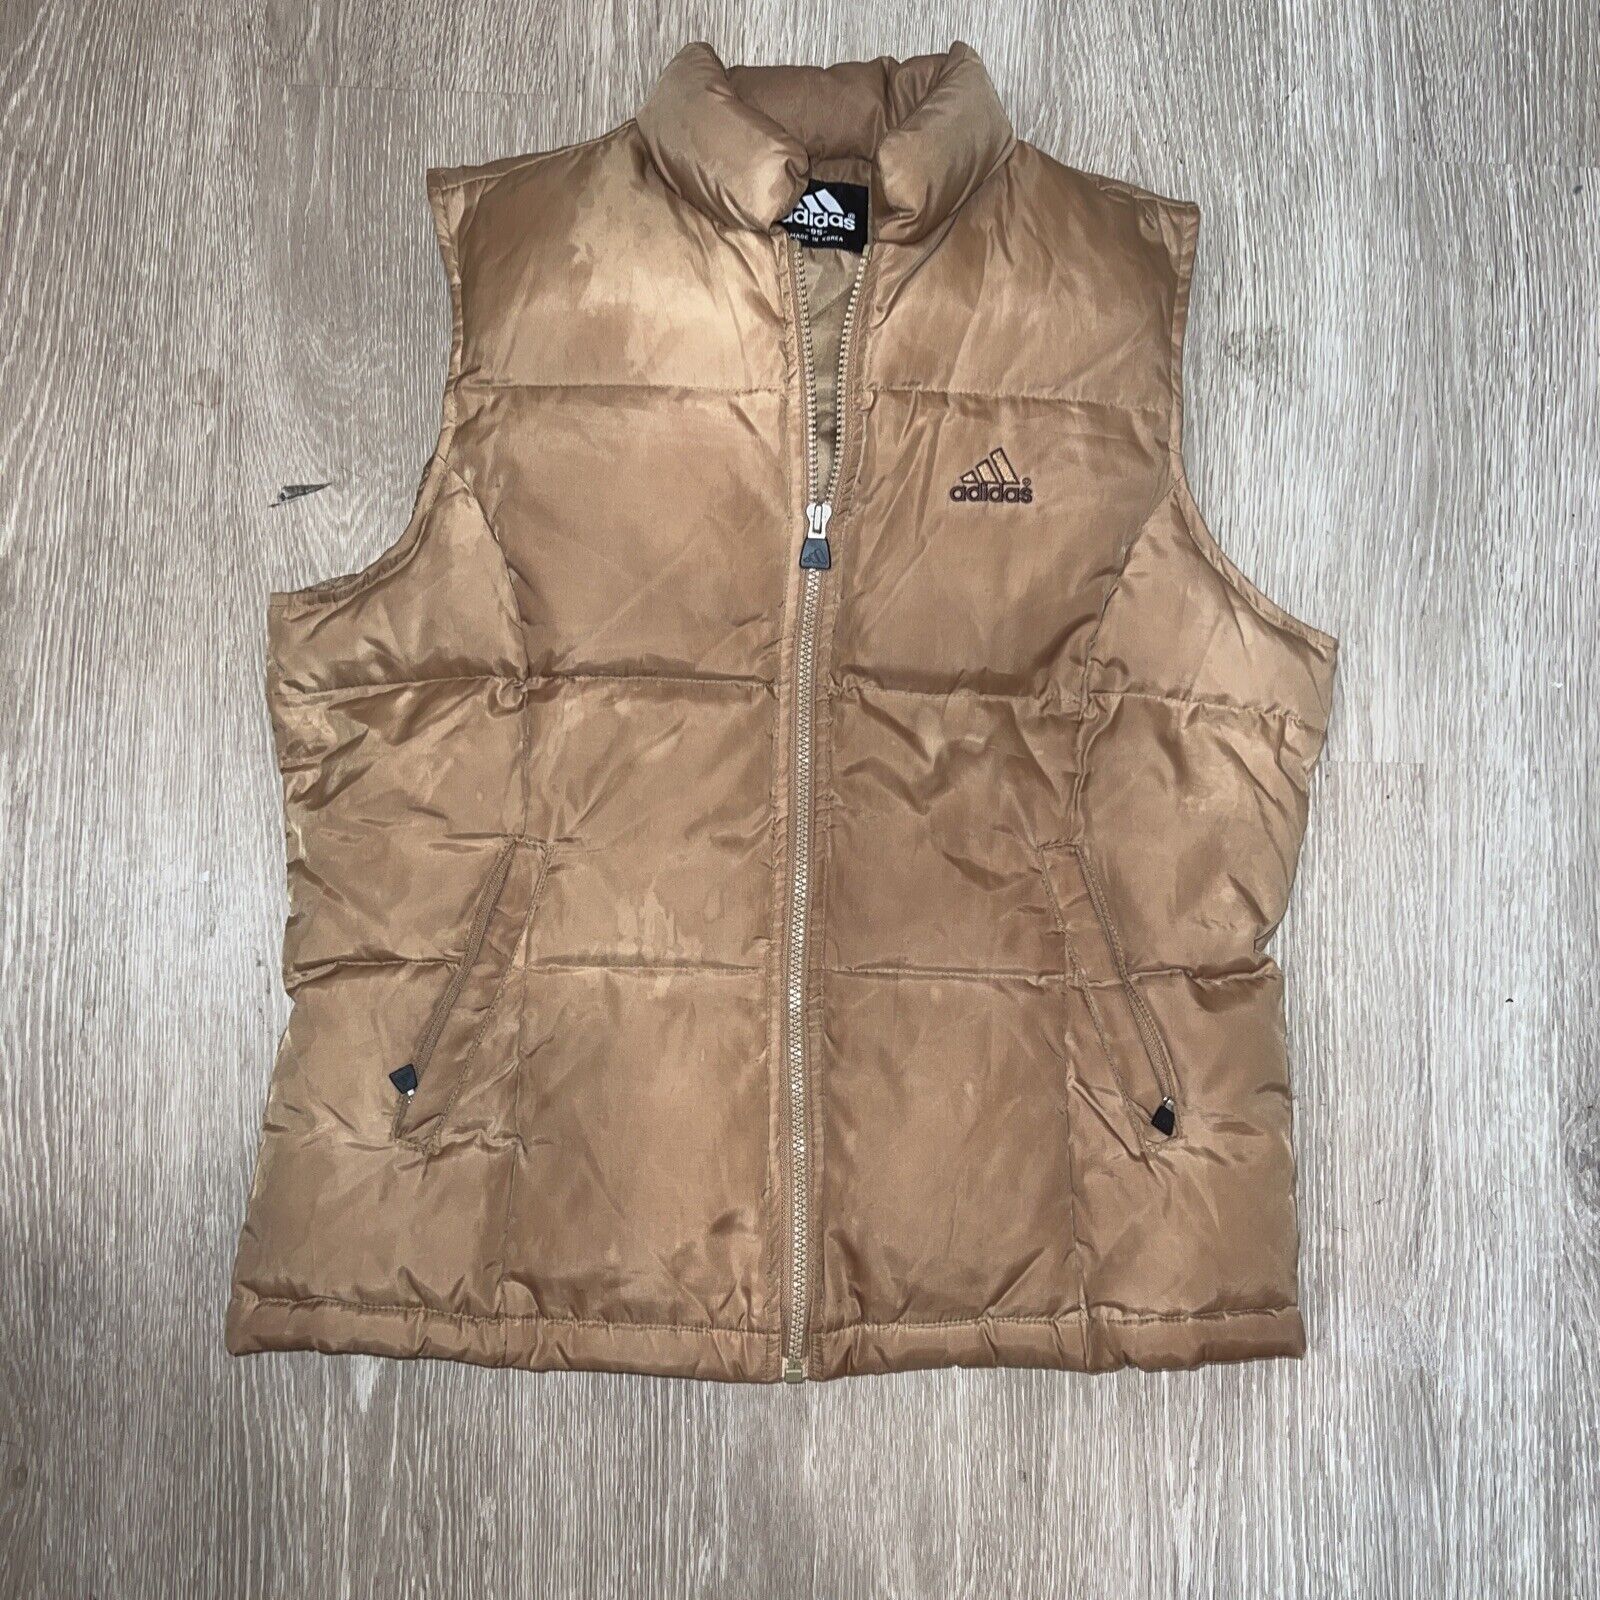 vintage 90s adidas puffer vest wheat brown womens size large